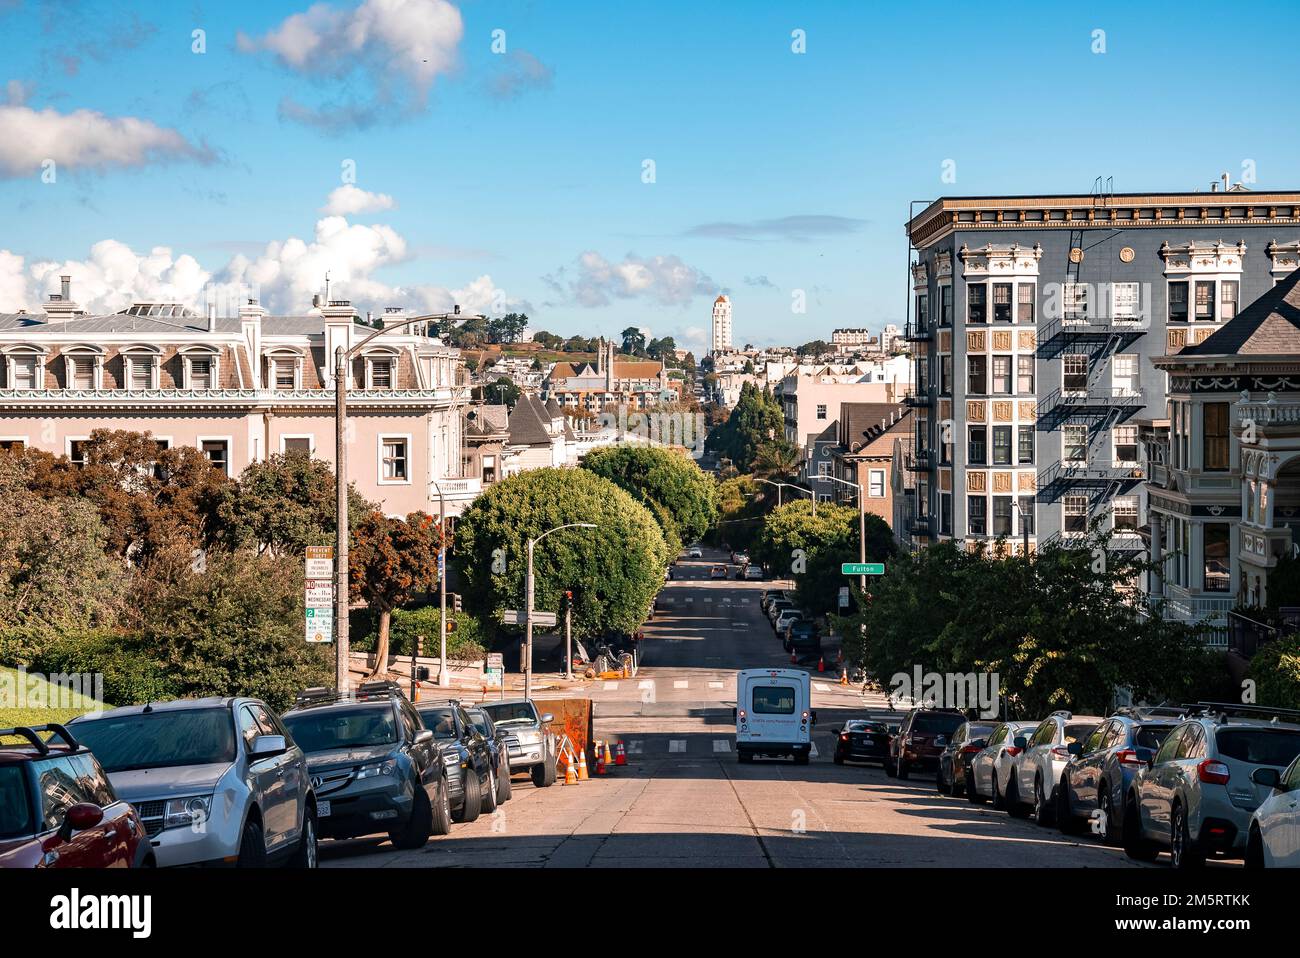 Cars parked on street amidst painted ladies buildings at Alamo Square Stock Photo